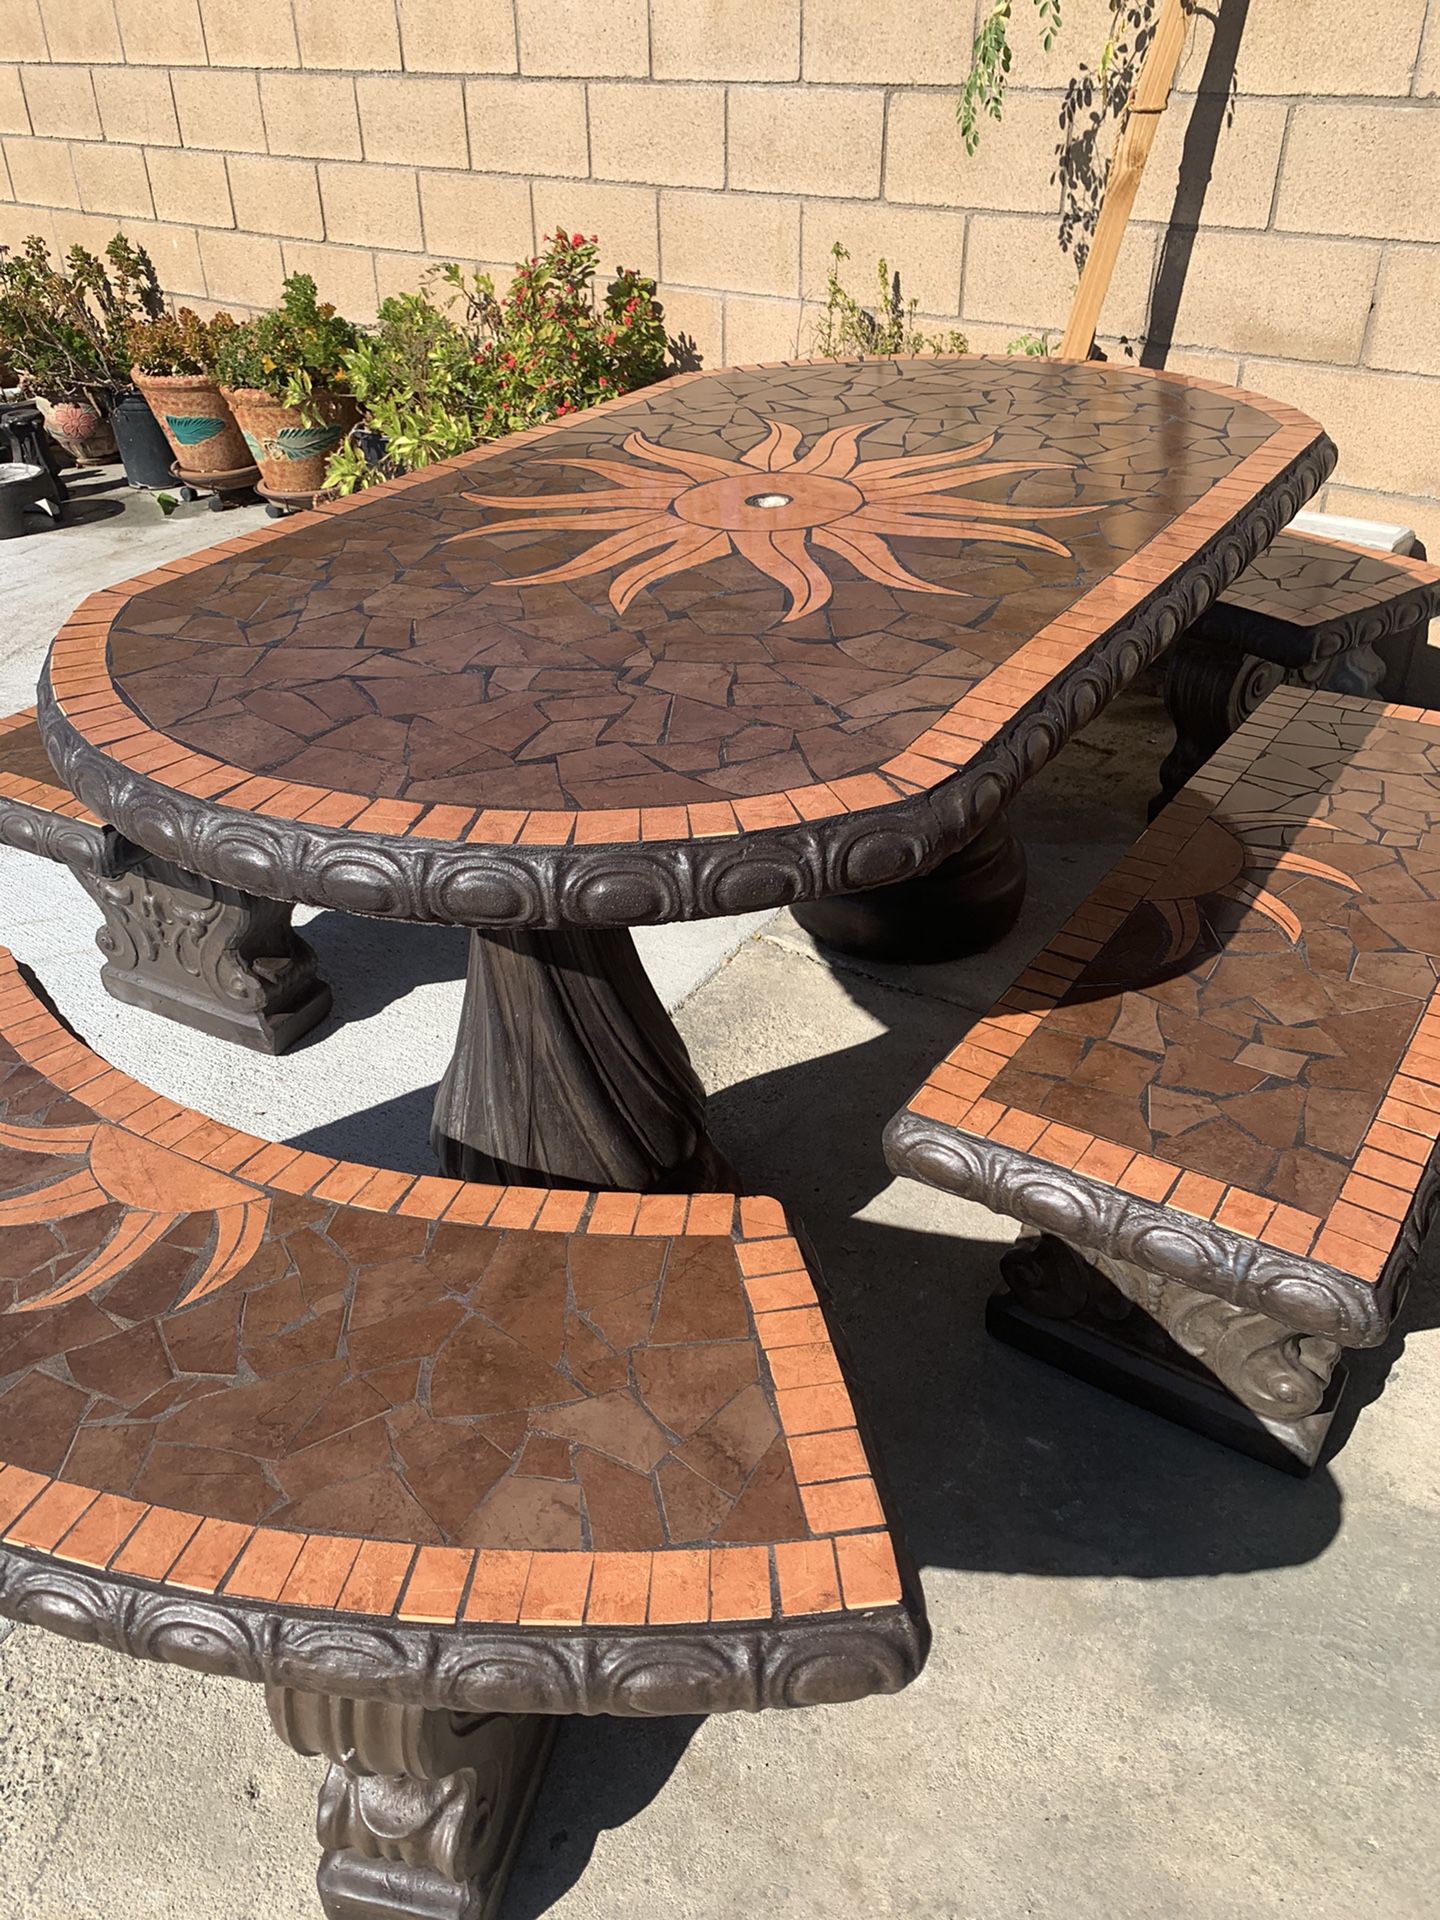 Oval cement patio table set